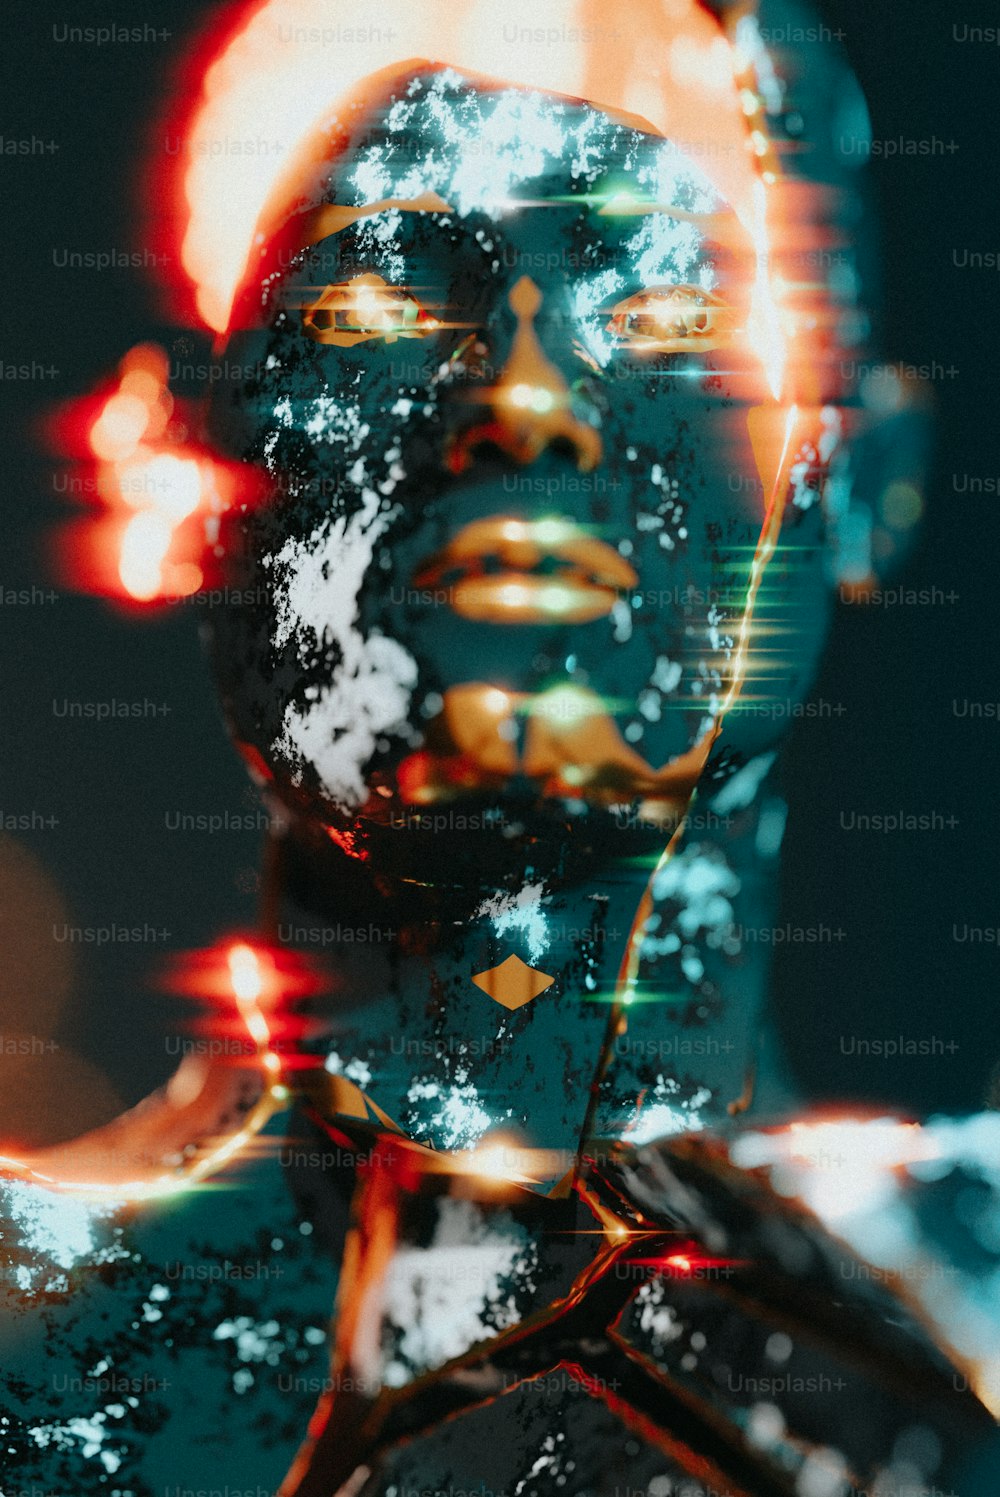 a digital image of a man's face and body